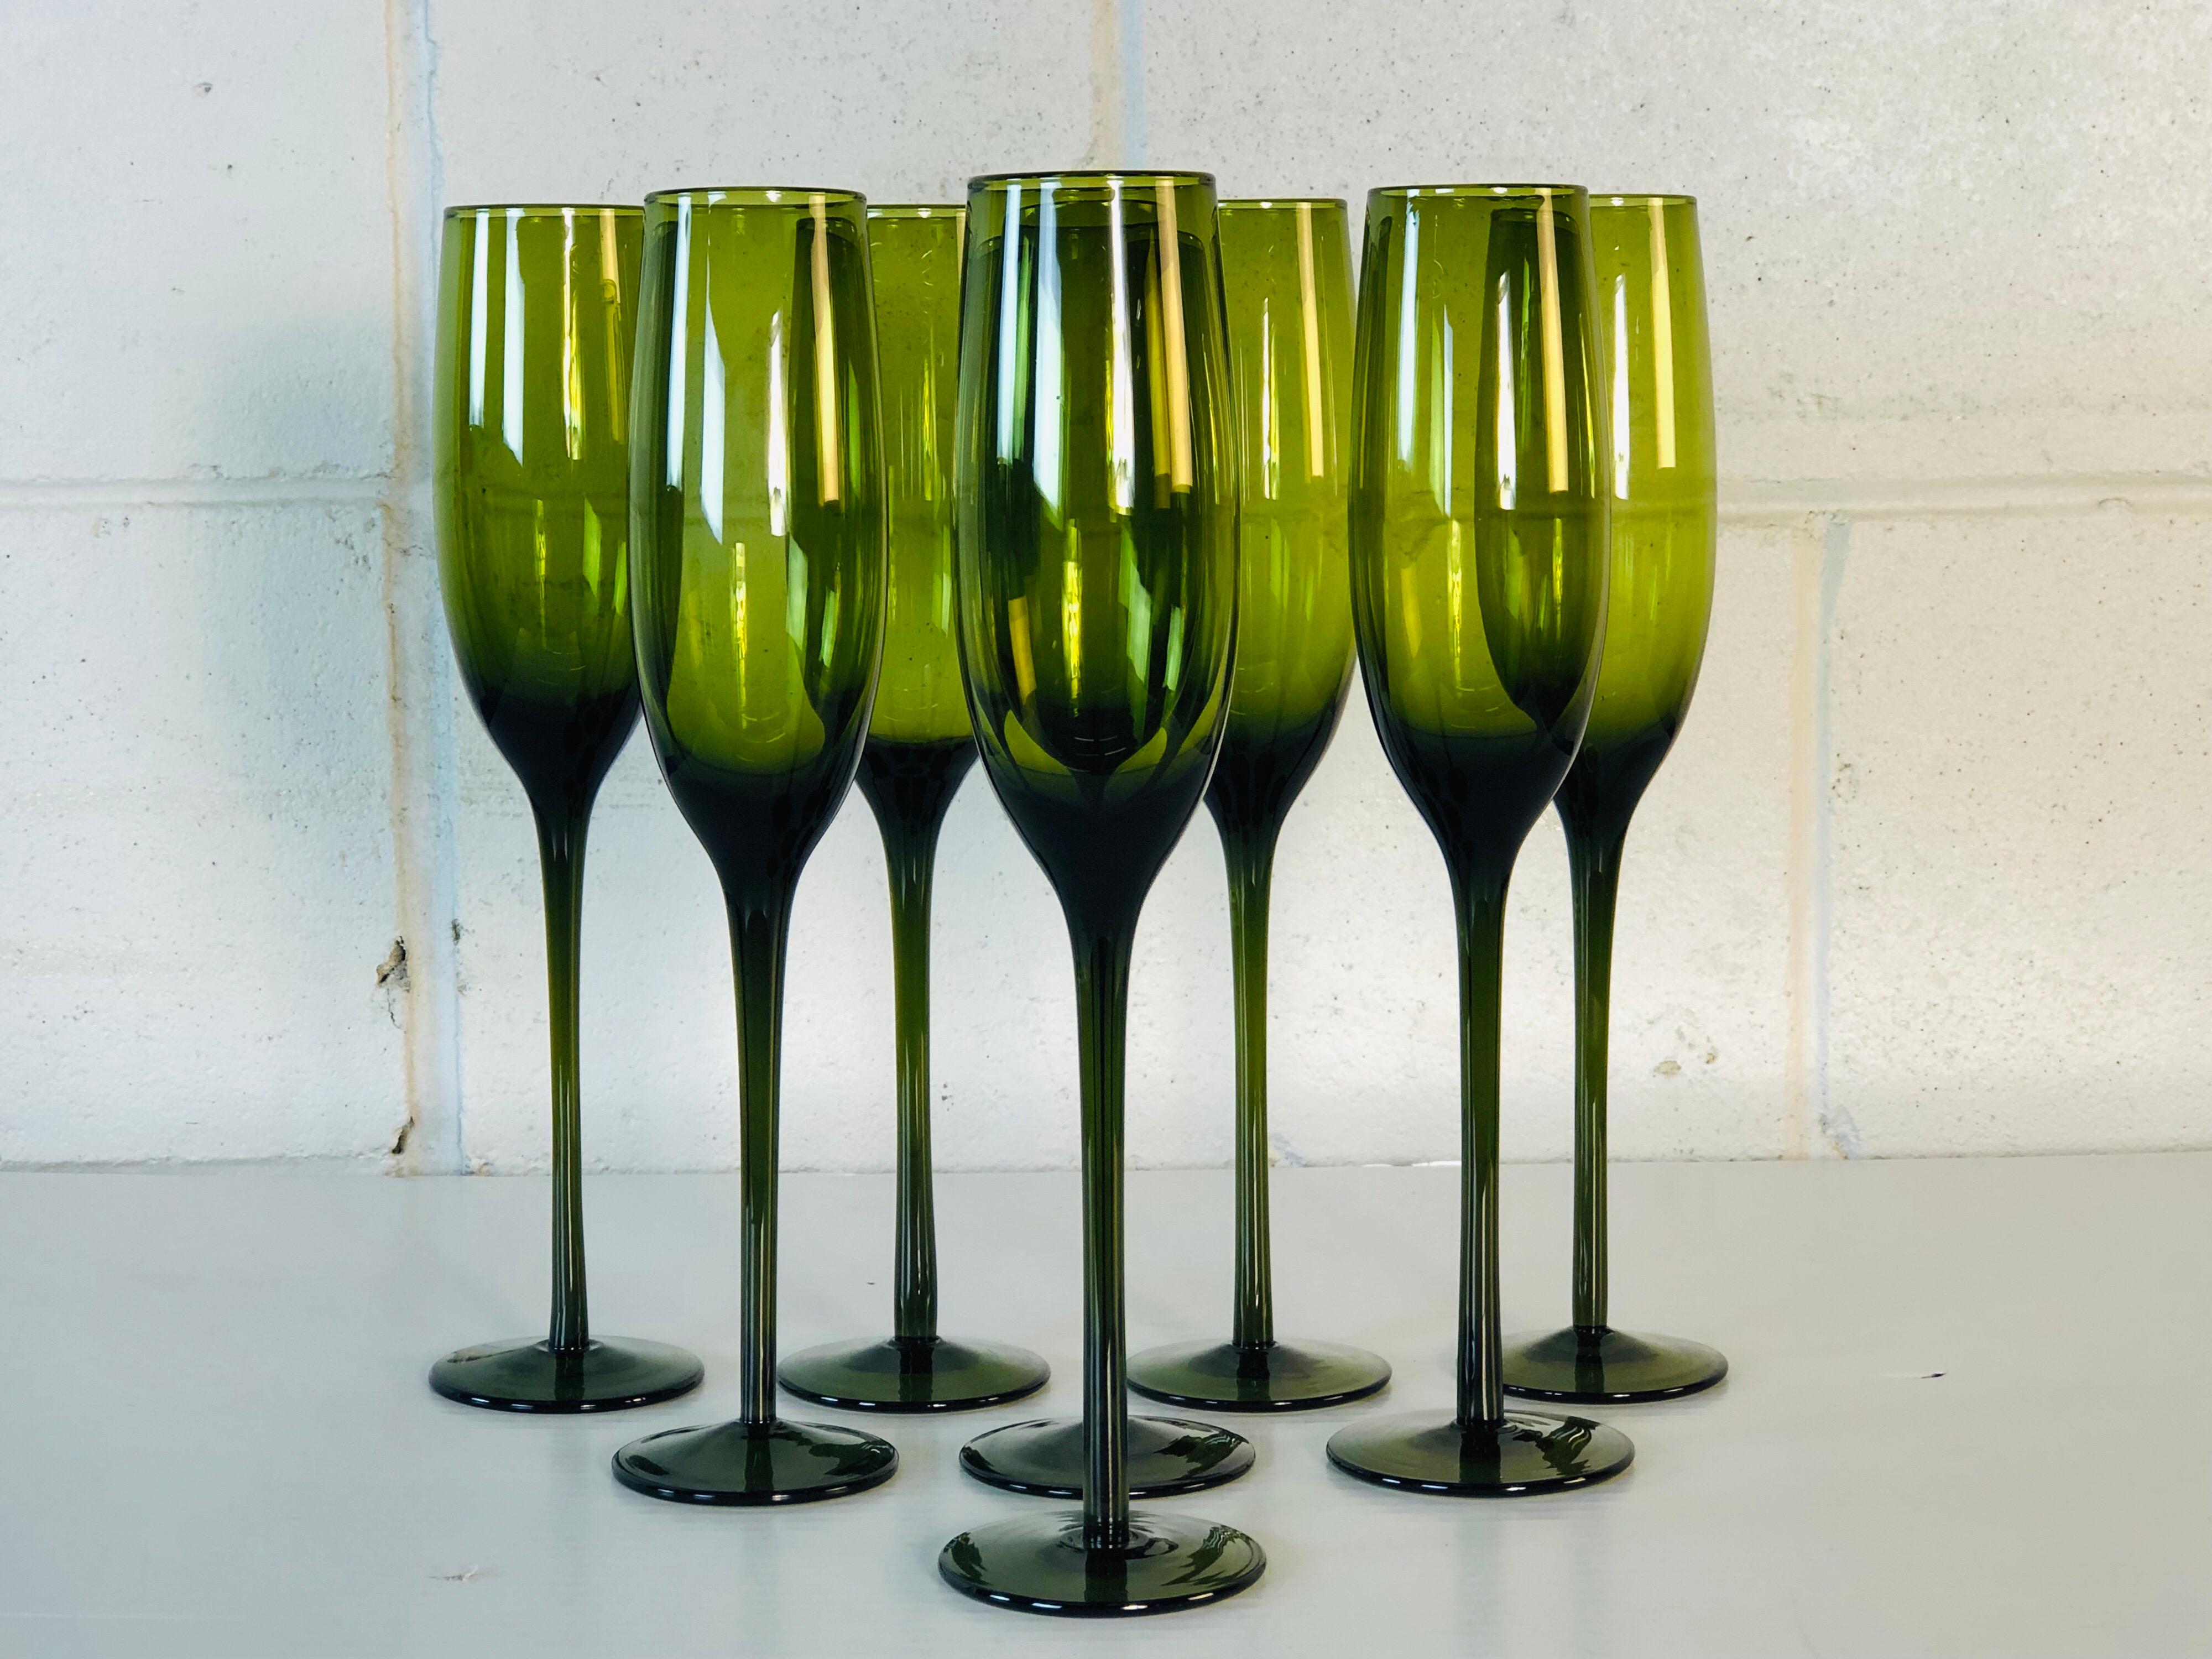 1960s Italian tall delicate green glass set of 8 champagne flutes. This set of stems is elegant and delicate glass. They will be a great addition to any party! Excellent condition. No marks.